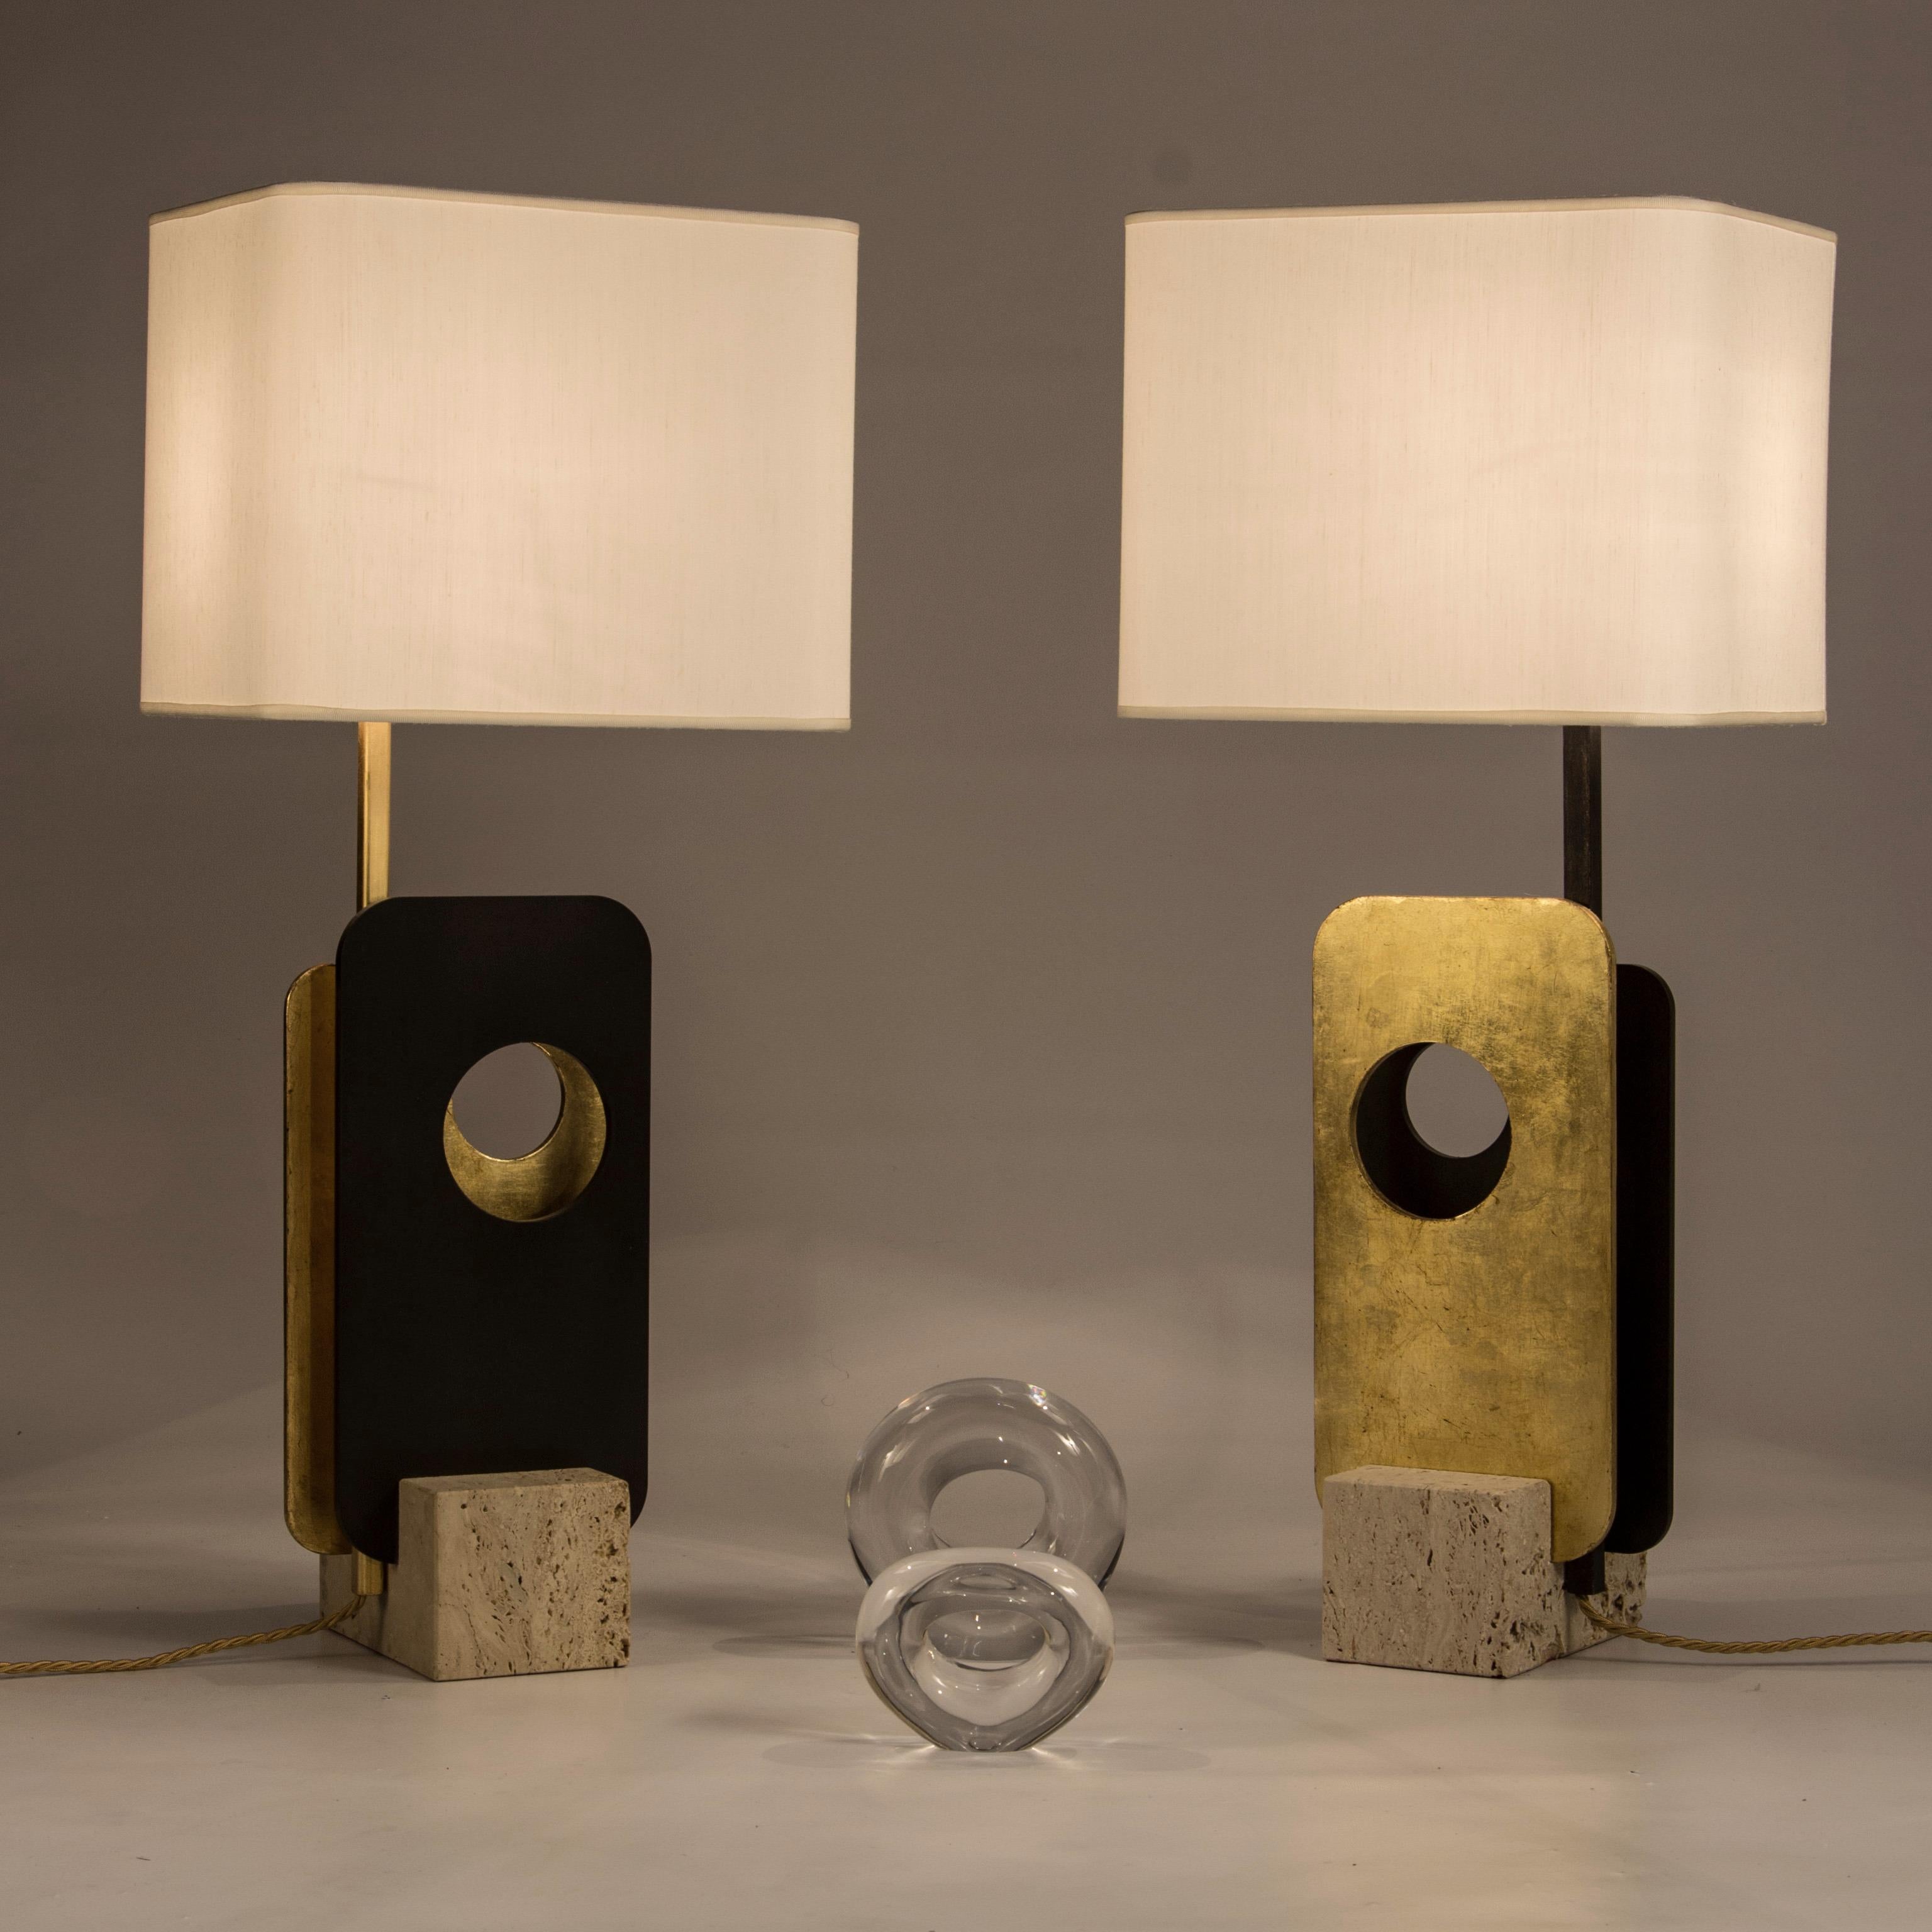 Lamp with structure consisting of two iron plates: one is decorated in gold leaf, the other in natural waxed iron. The plates are housed in a marble base (it is possible to choose polished travertine or white Carrara marble). The ivory-colored